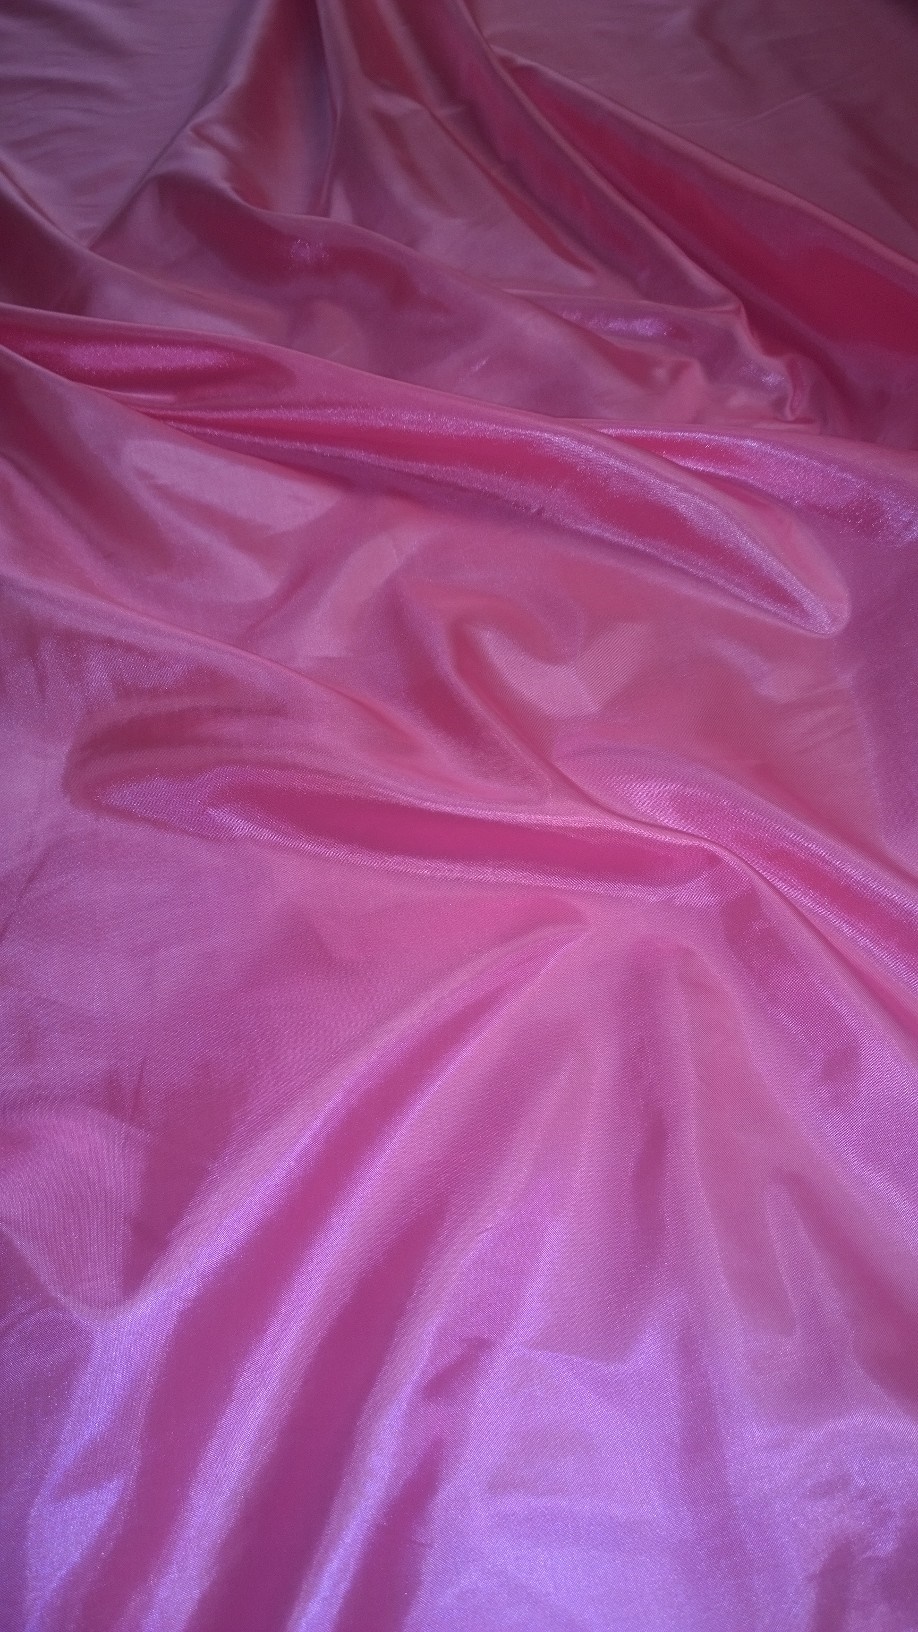 By The Yard- 60" Neon Pink Habotai Fabric - 100% Polyester